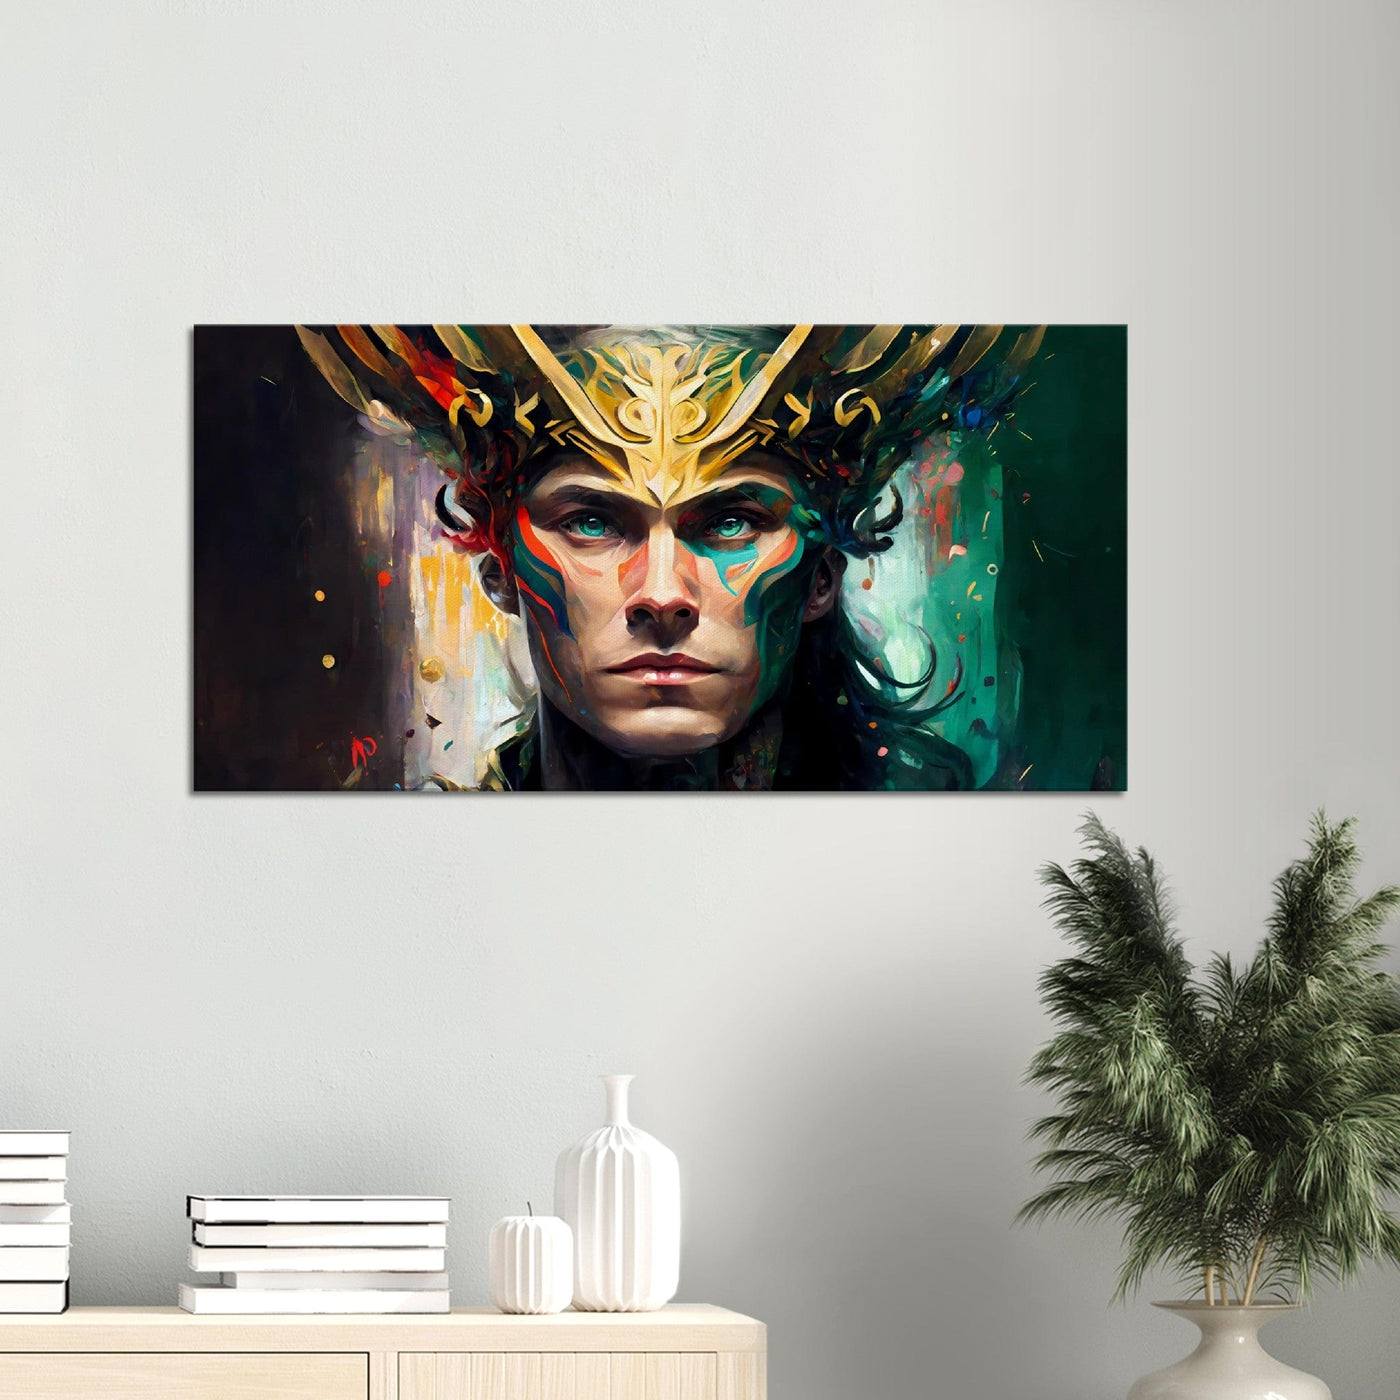 The Trickster of Asgard - Oil Painting Printed Canvas. 50X100.